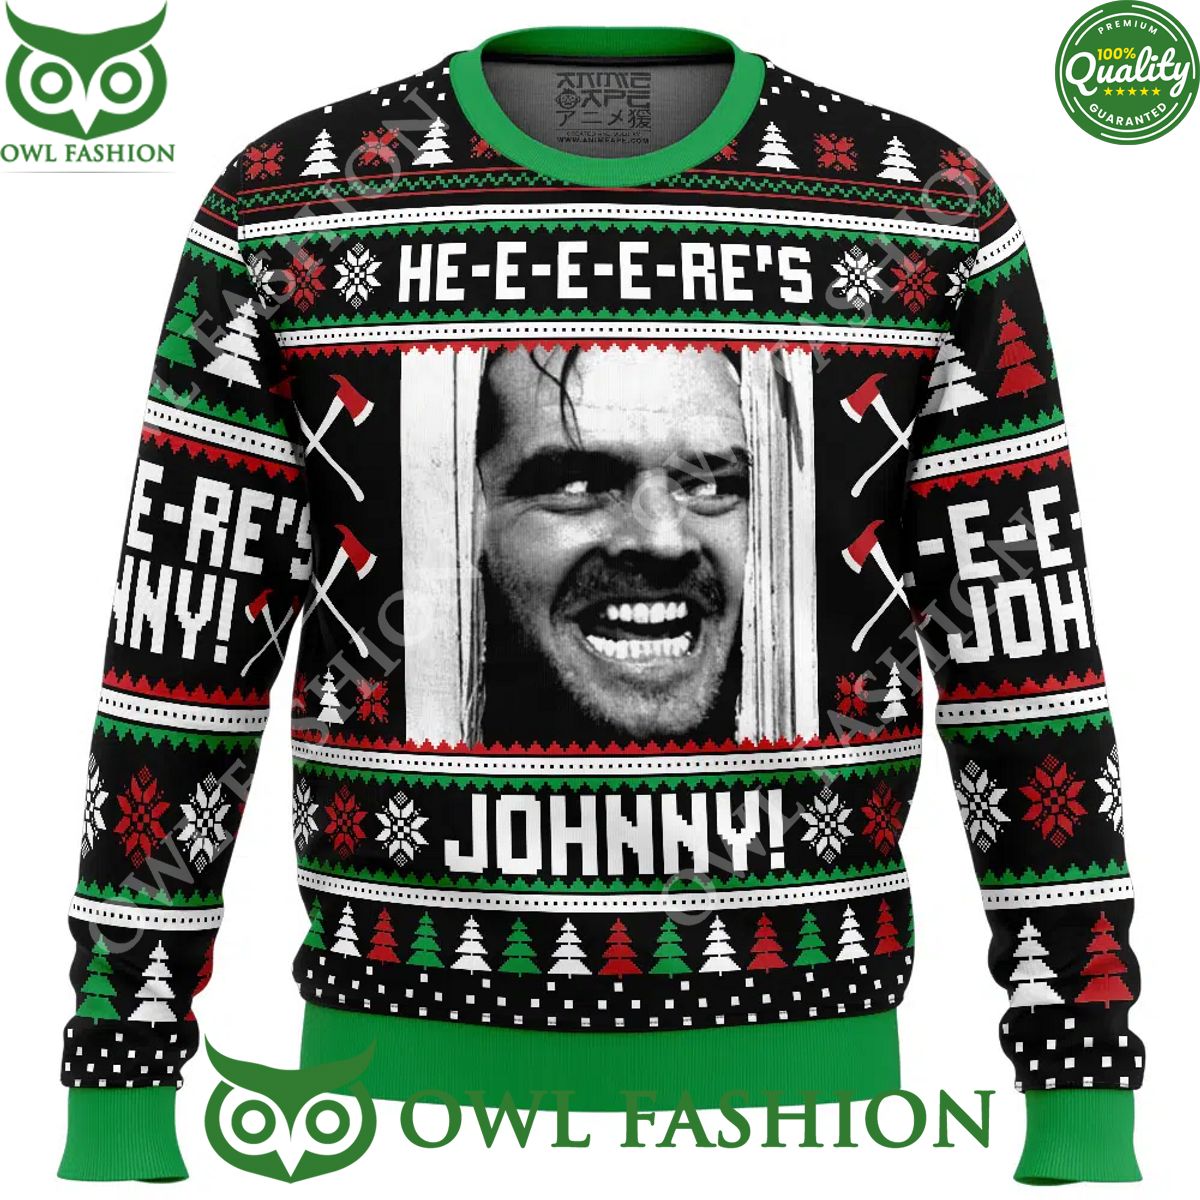 Here Johnny The Shining Ugly Christmas Sweater Jumper